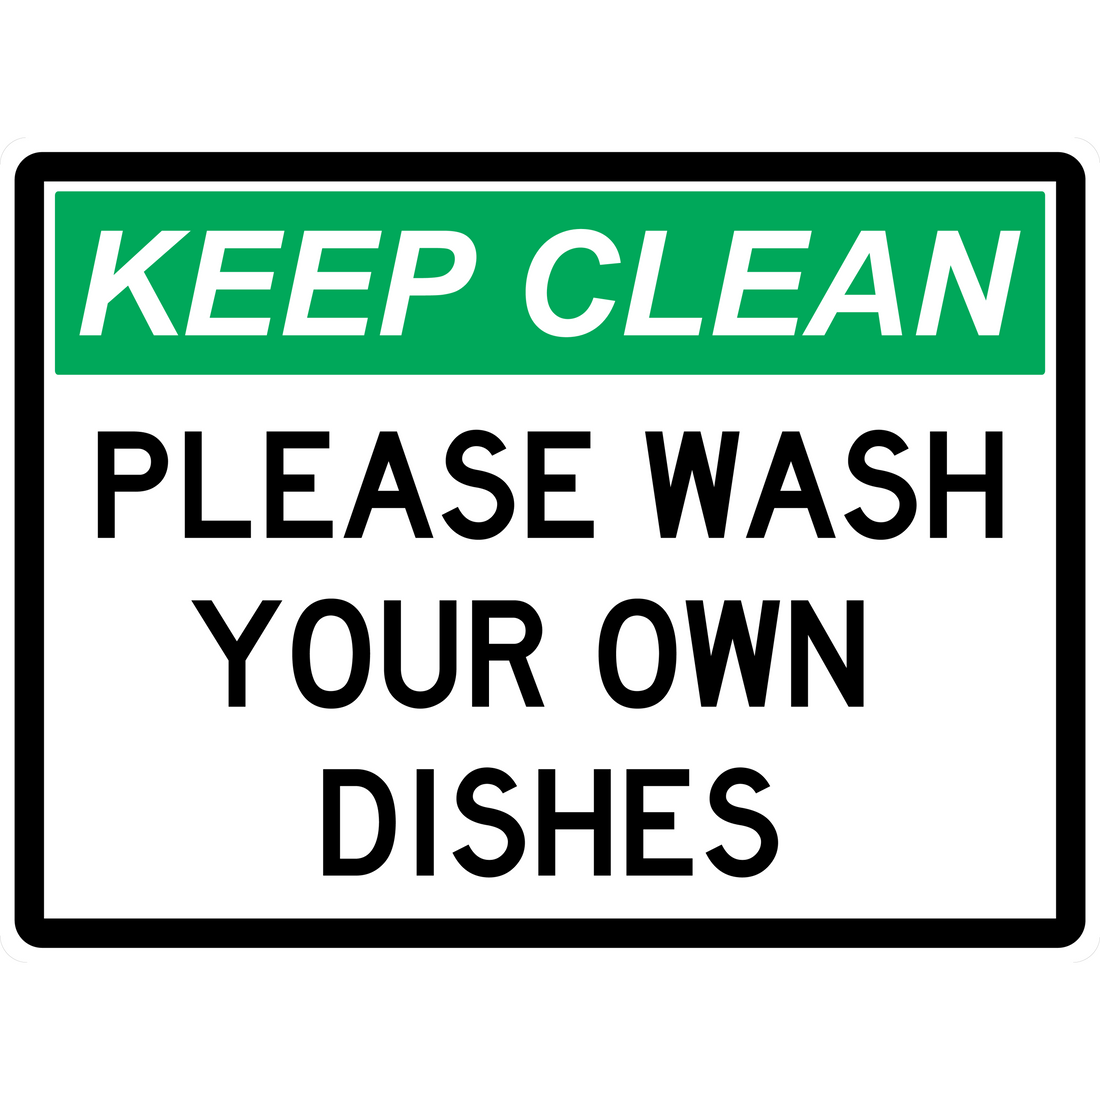 GENERAL-PLEASE-WASH-YOUR-OWN-DISHES